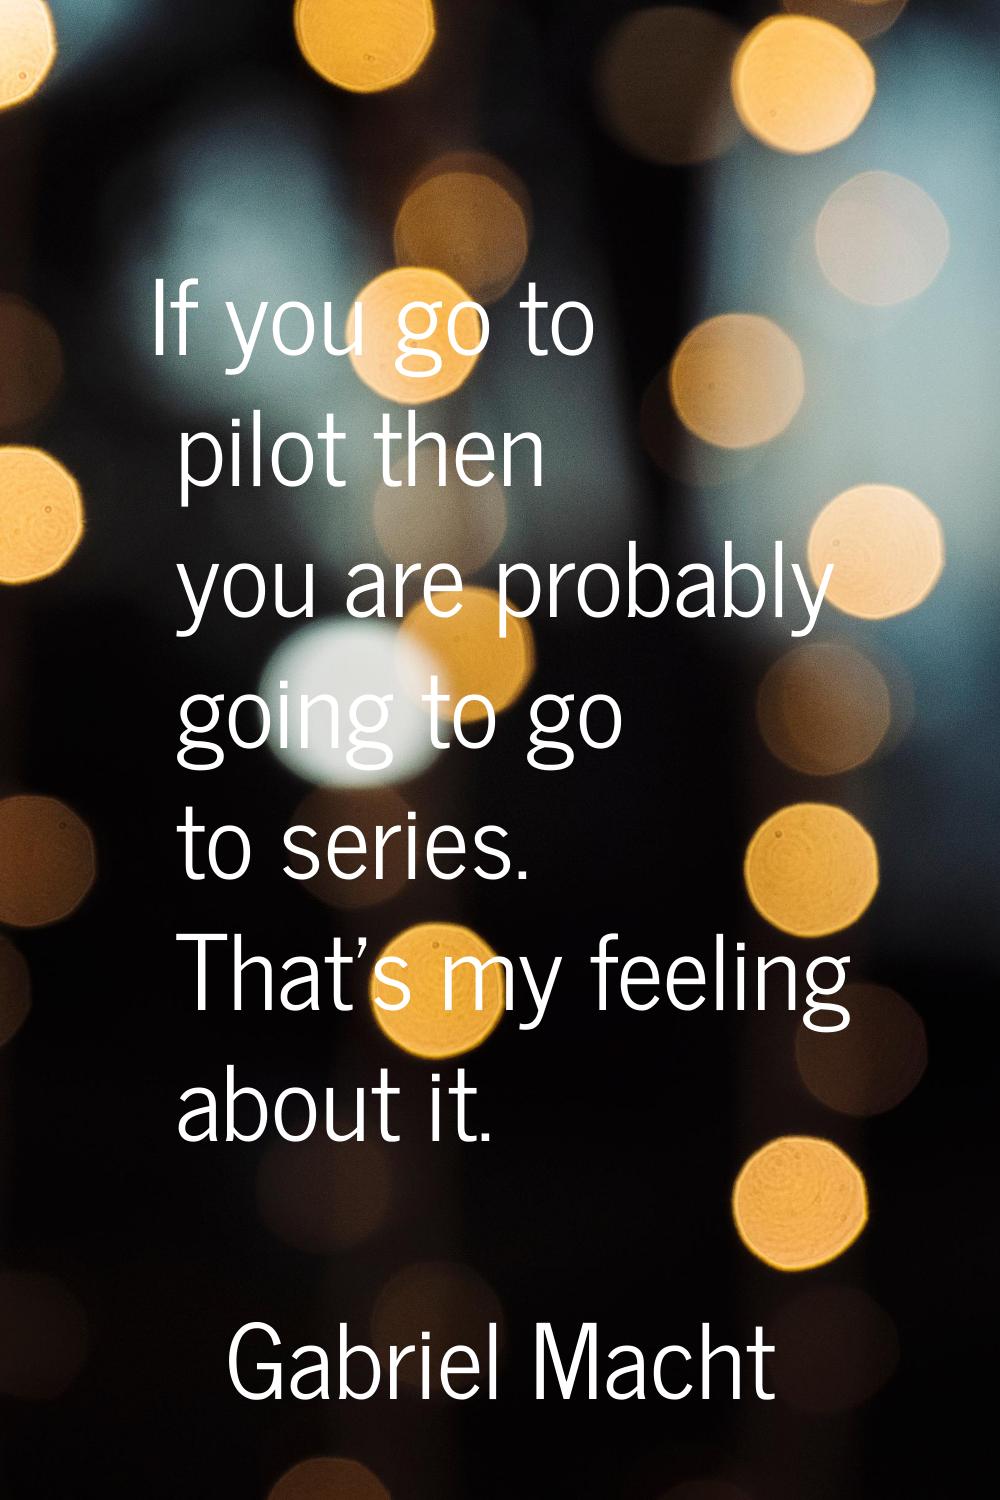 If you go to pilot then you are probably going to go to series. That's my feeling about it.